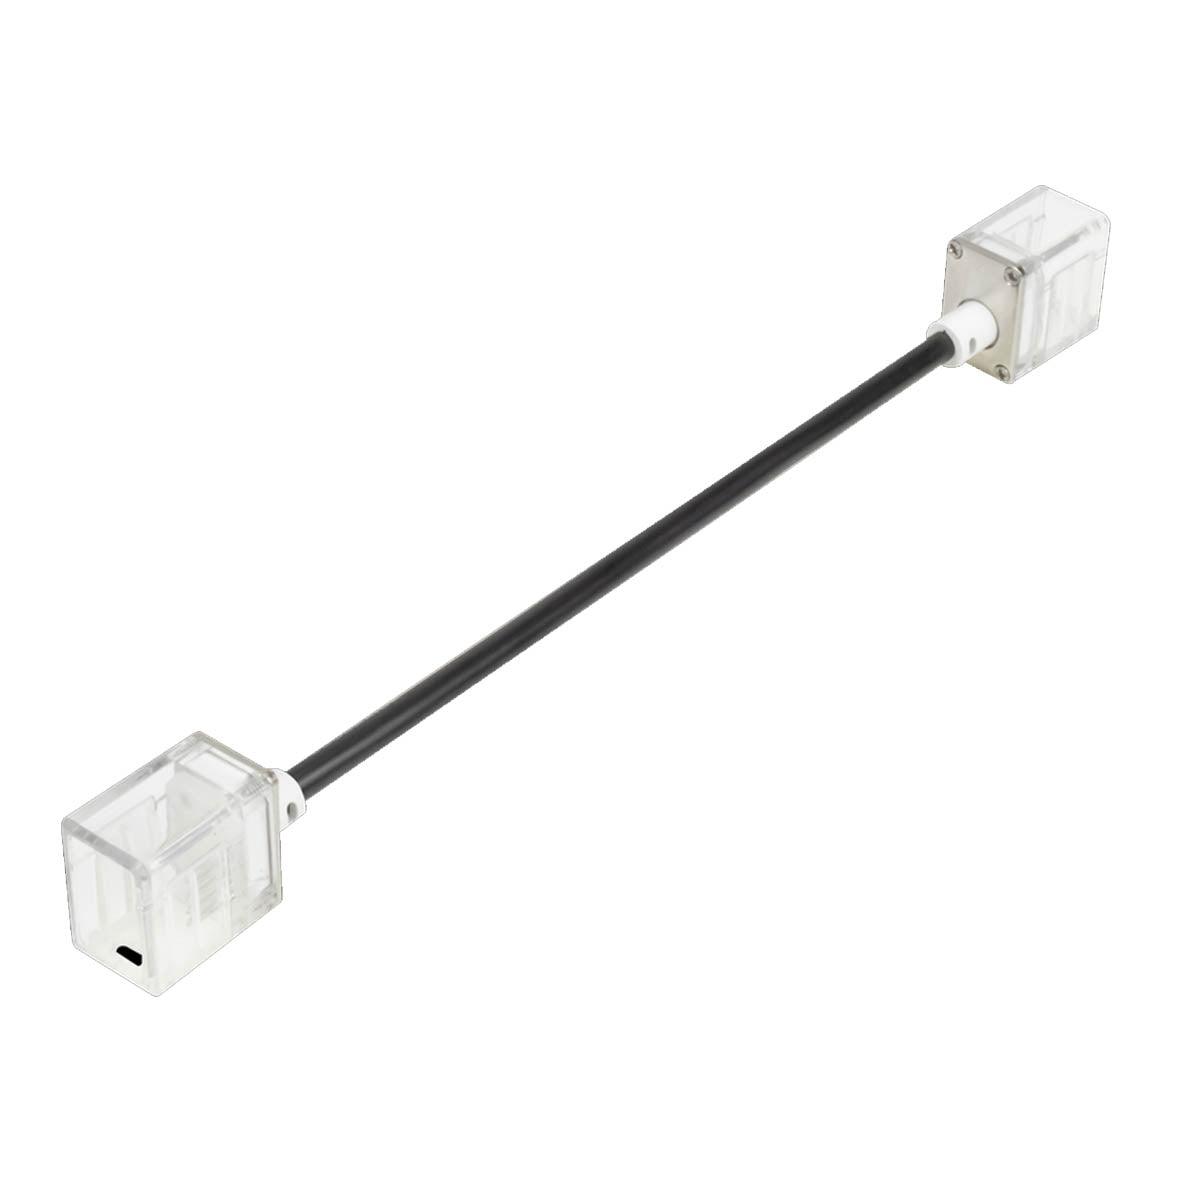 NeonFlex 36” Pro-L Linking Cable Front Feed (5-pin) - Bees Lighting